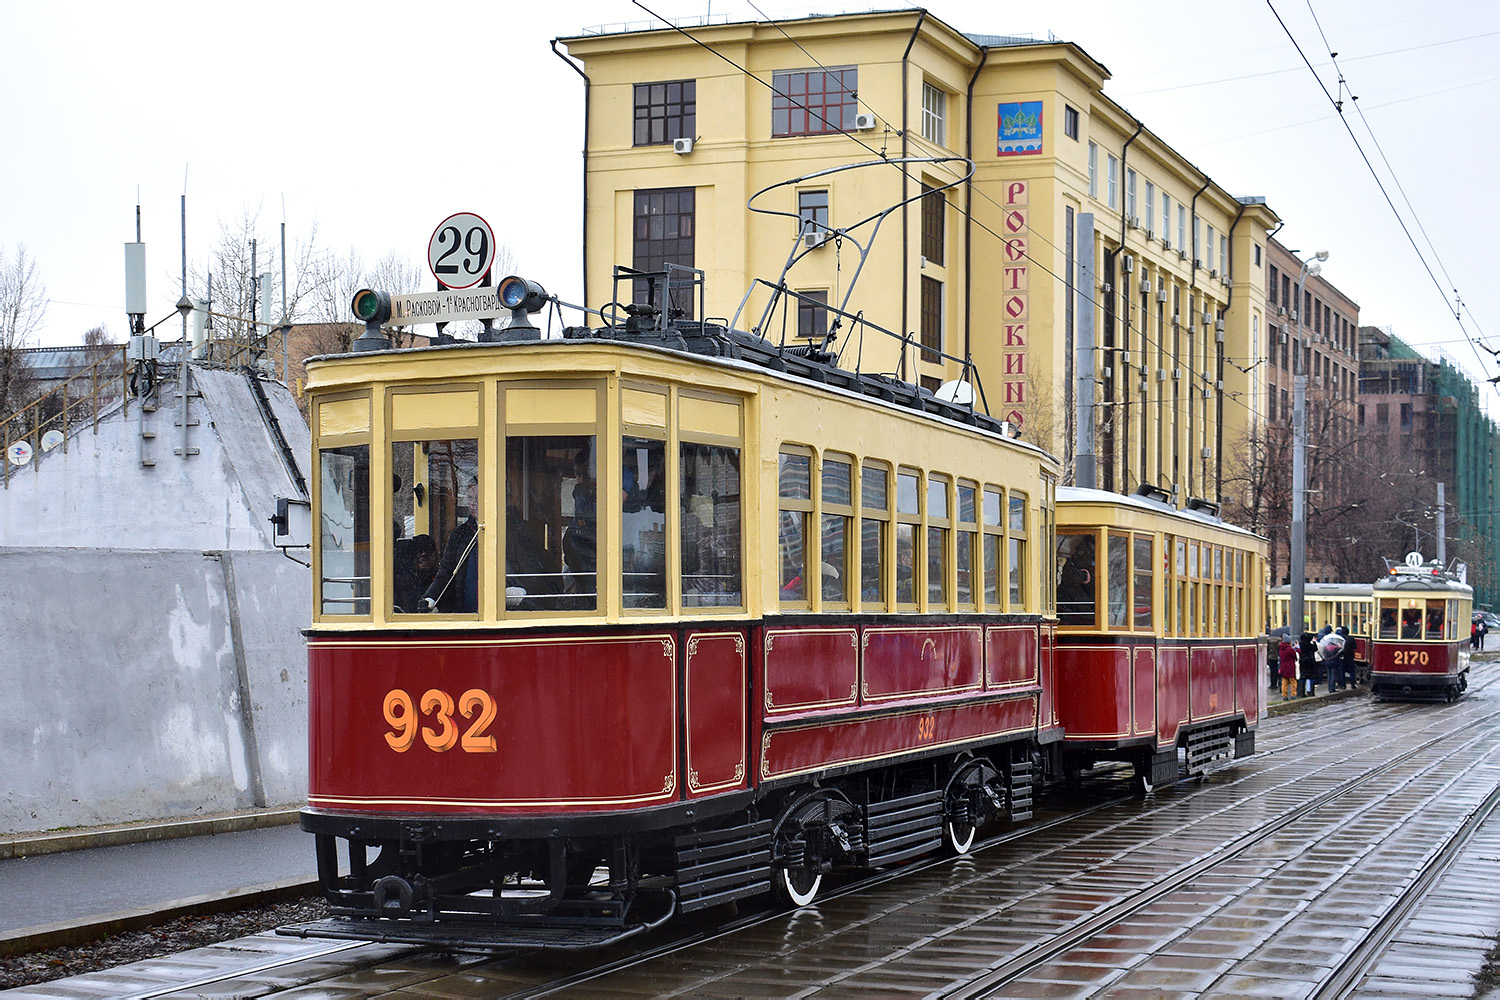 Moscow, BF # 932; Moscow — 123 year Moscow tram anniversary parade on April 16, 2022